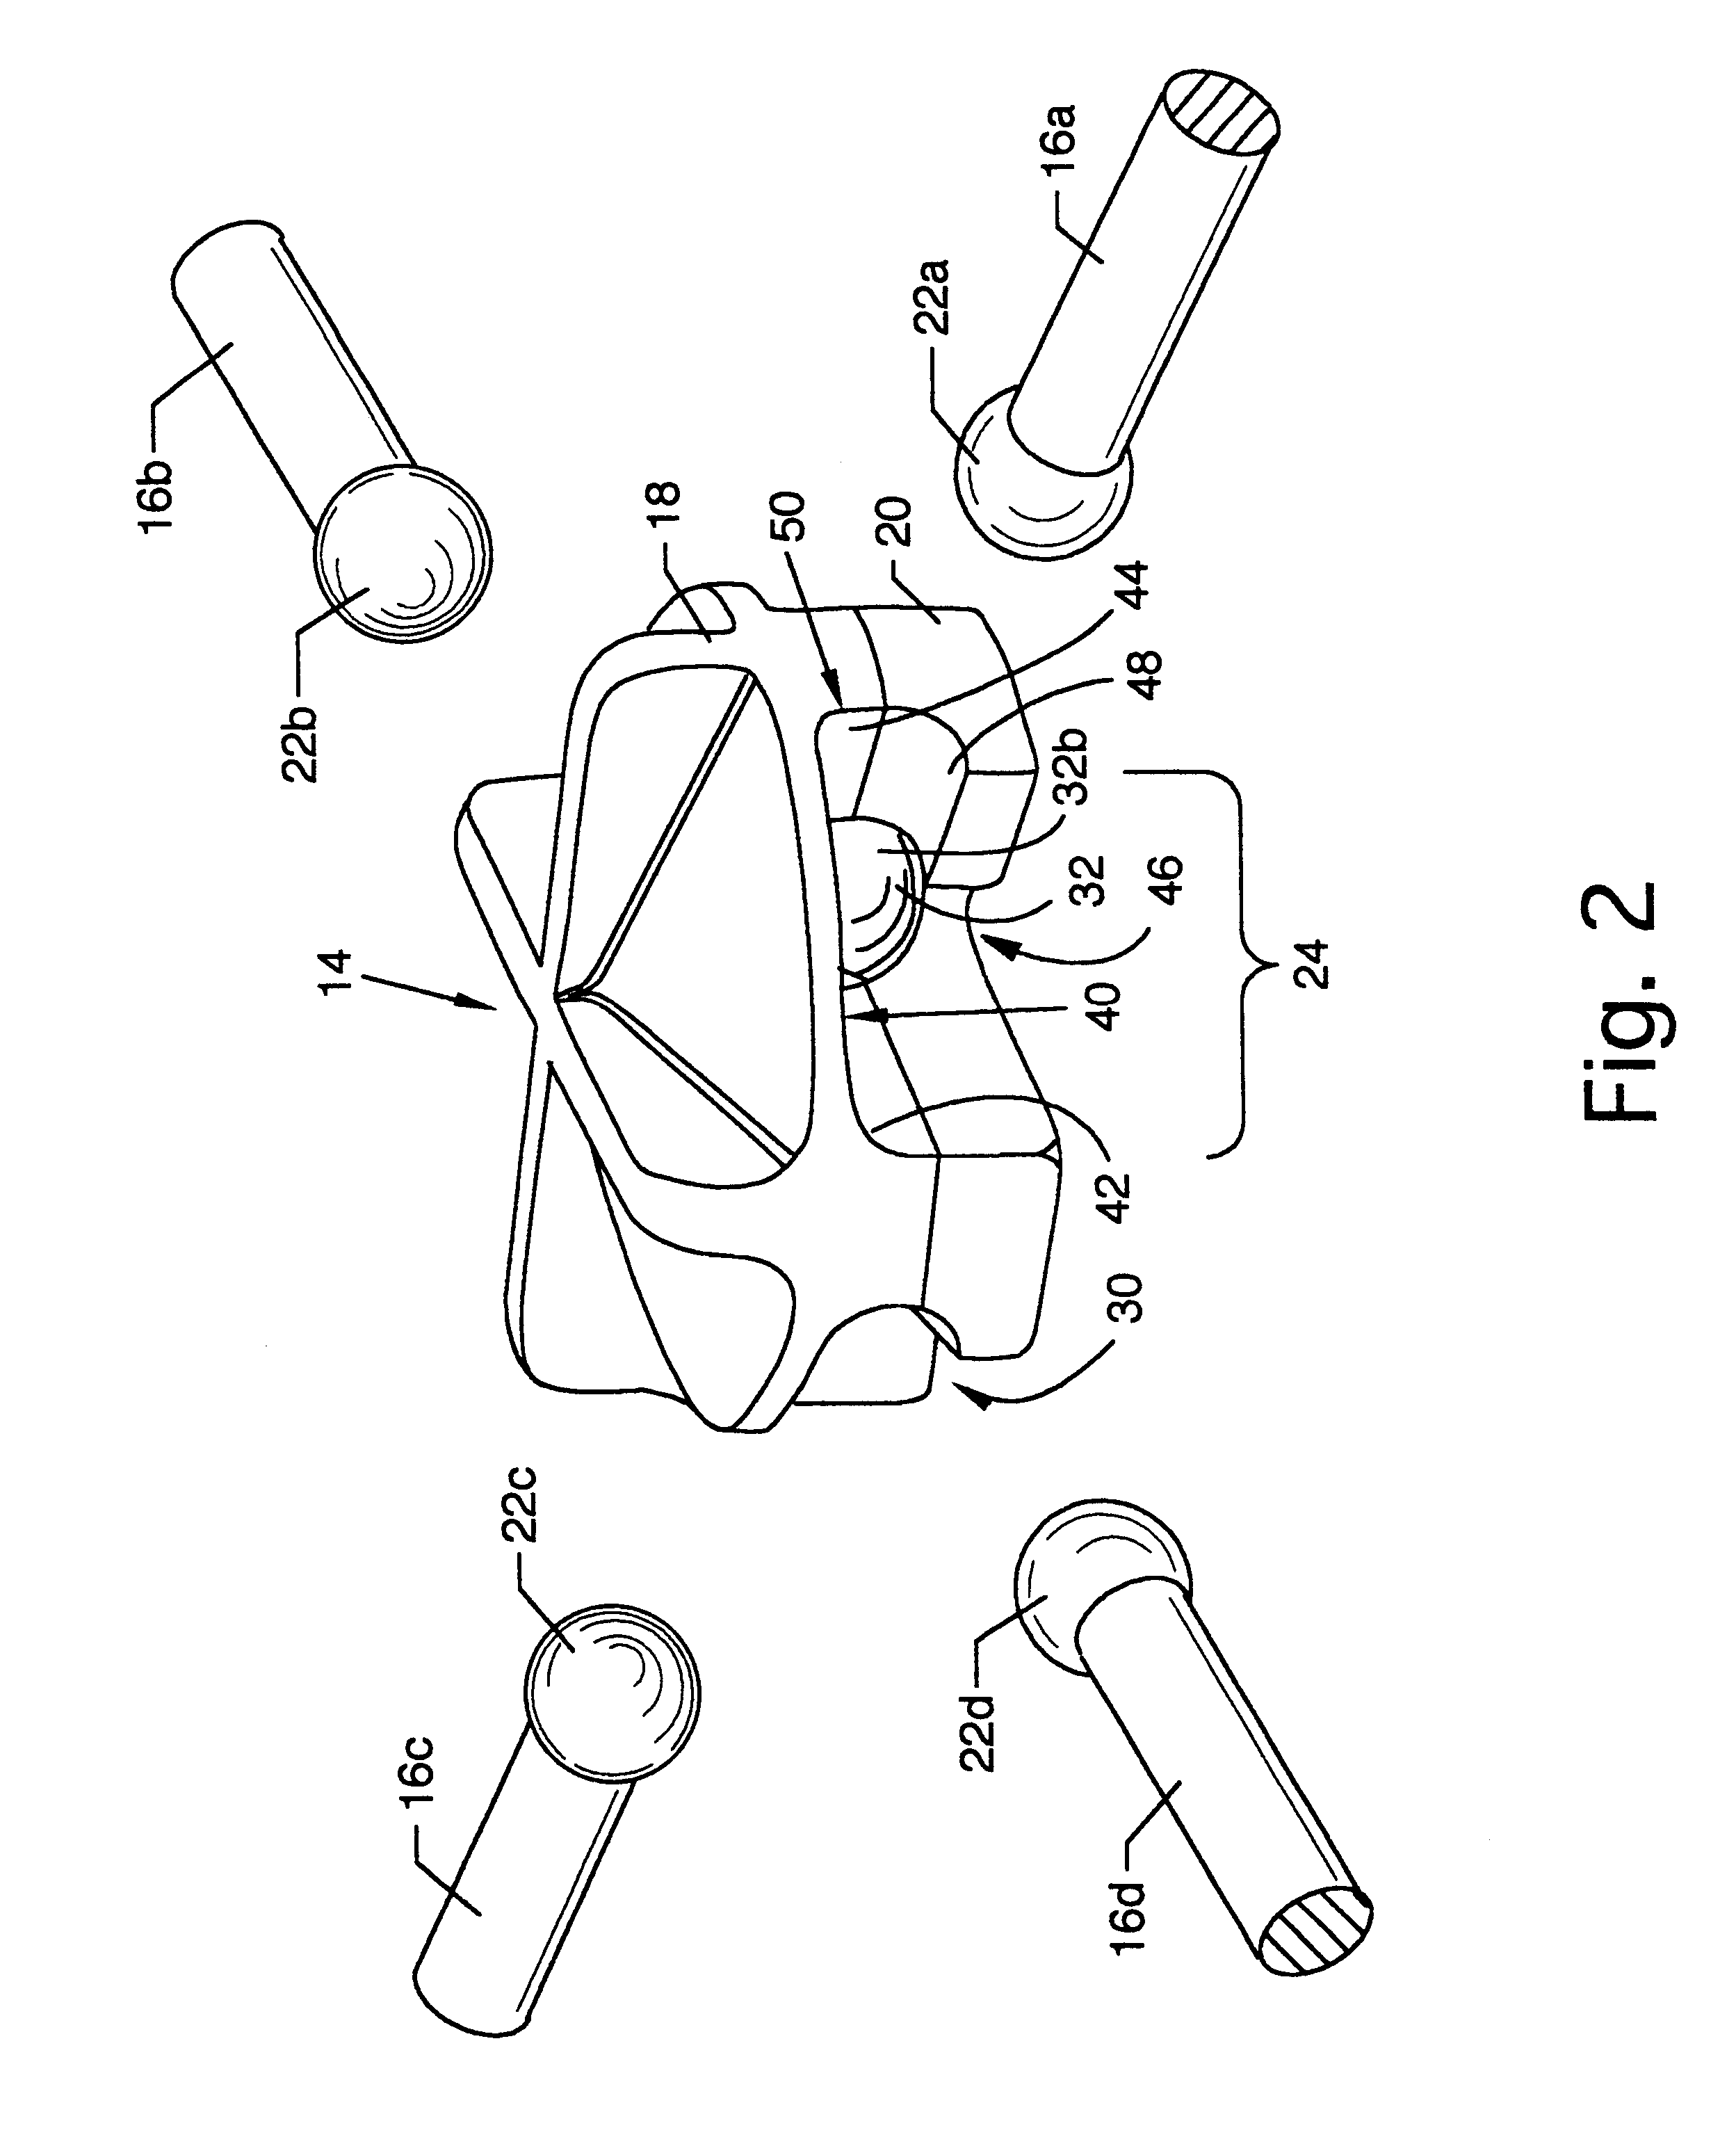 CAM type hub and strut for use in portable and semi-permanent structures